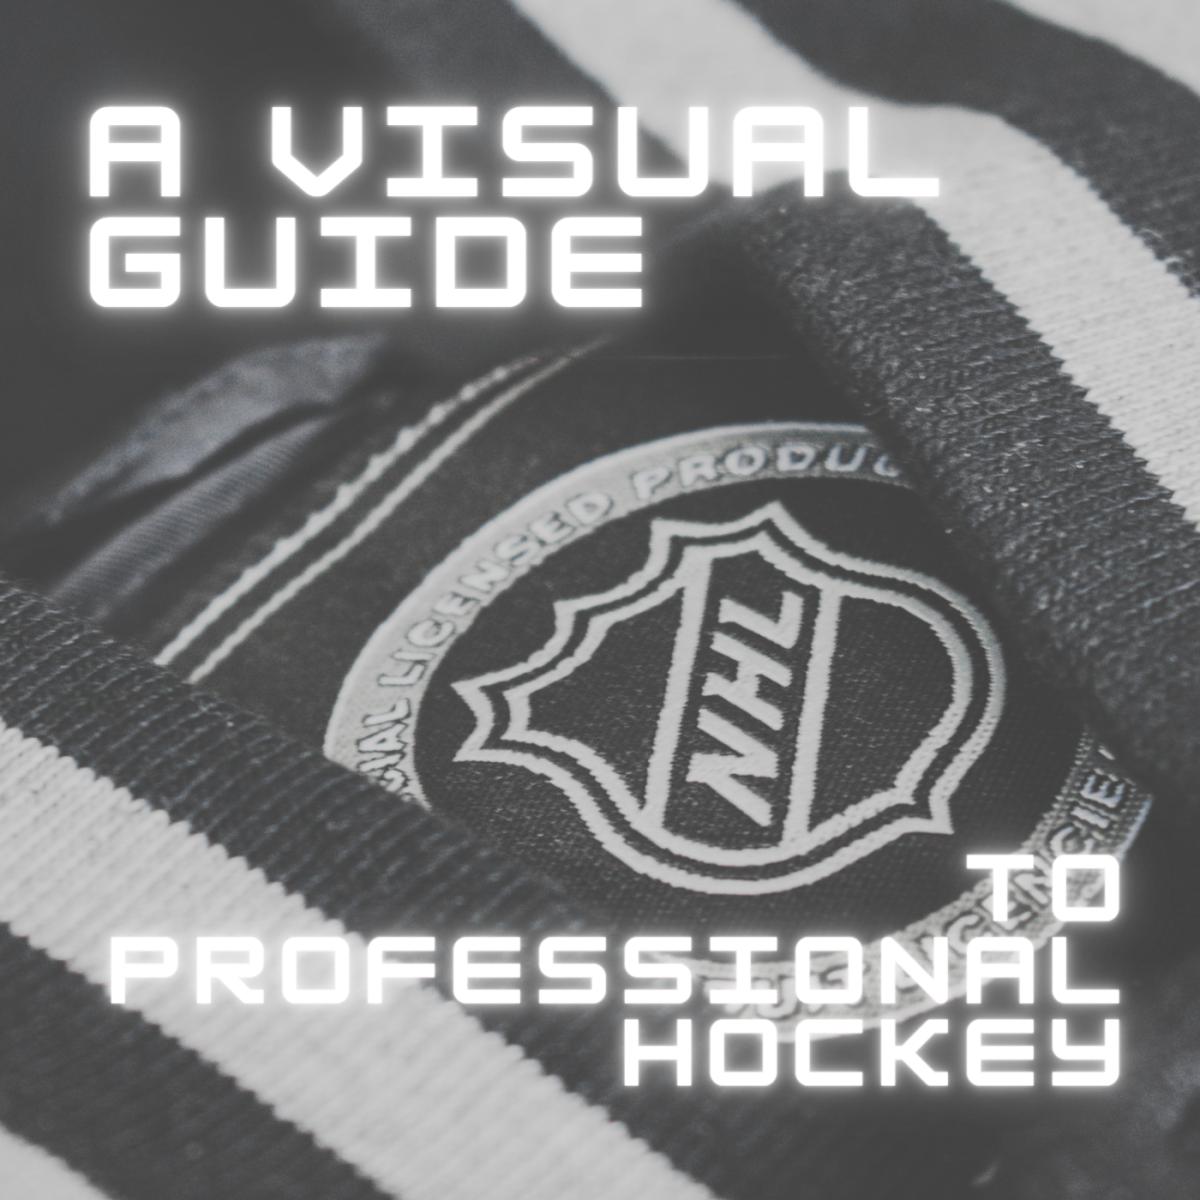 Basic Rules of NHL Hockey: A Visual Guide - HowTheyPlay